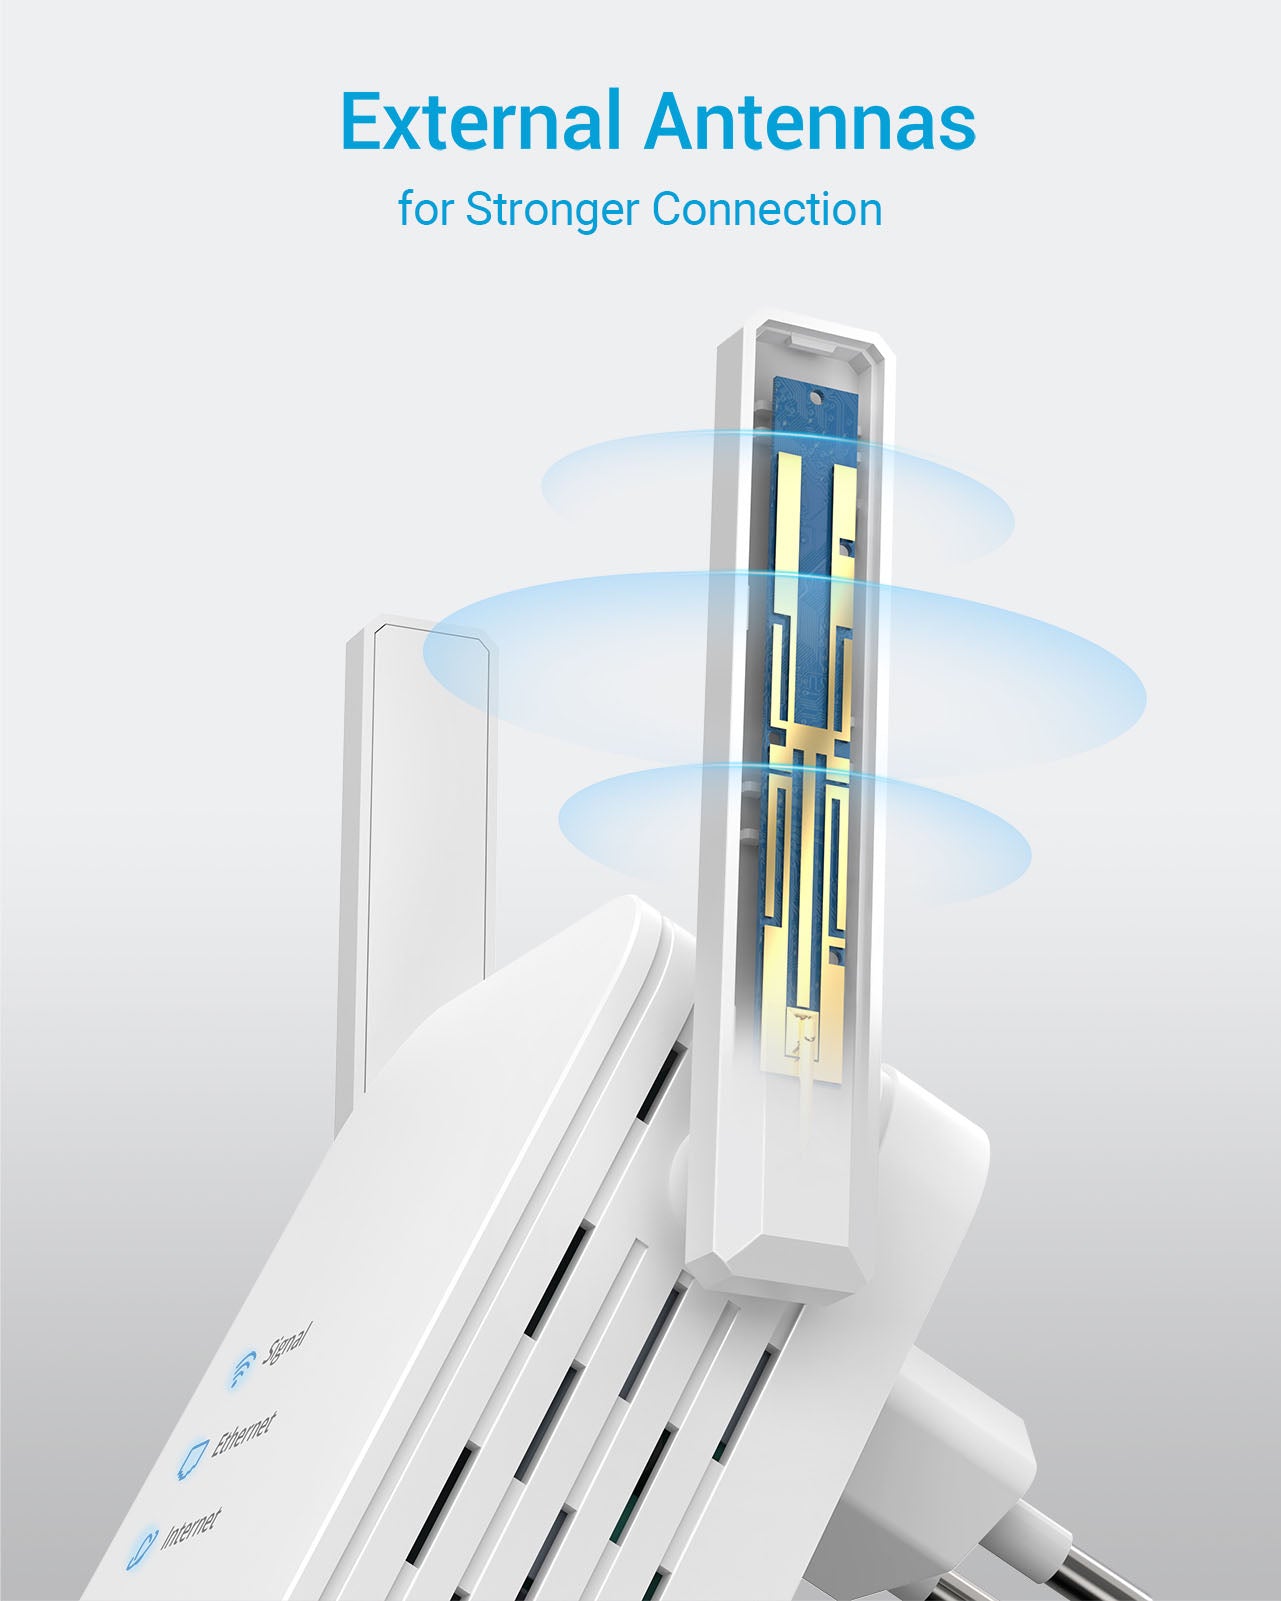 WiFi to Ethernet Adapter with External High-gain Antennas Builds a Robust Connection with Your WiFi Router 